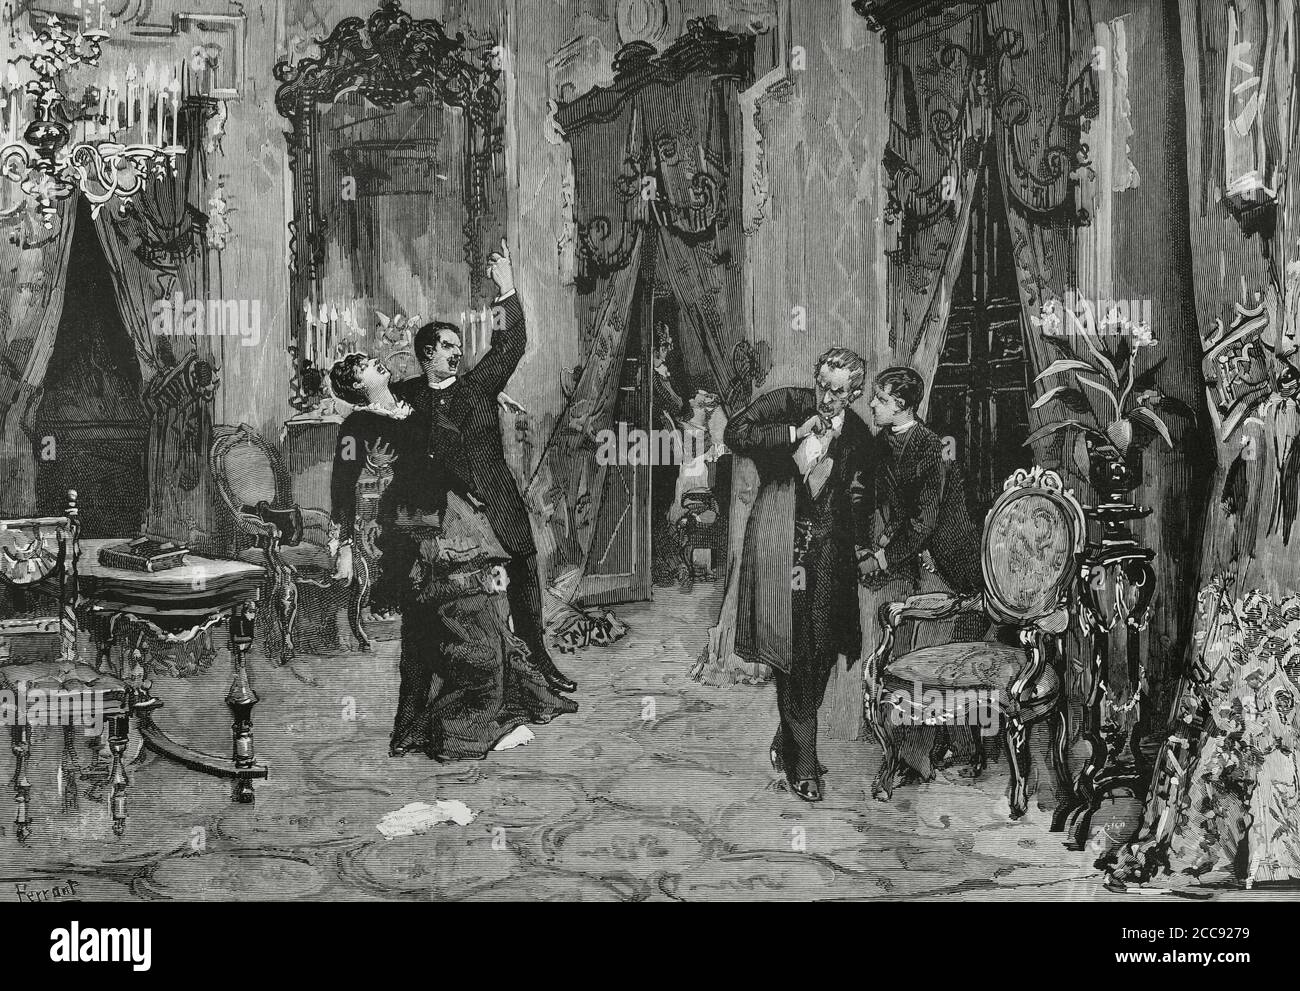 José Echegaray y Eizaguirre (1832-1916). Spanish engineer, playwright, politician and mathematician. Leading of the Spanish dramatist of the last quarter of the 19th century. Nobel Prize for Literature in 1904. Final scene of one of his dramas 'El Gran Galeoto' (The Great Galeoto). It is about the poisonous effect that unfounded gossip has on a middle-aged man's happiness. Illustration by Ferrant. Engraving by Rico. La Ilustracion Española y Americana, 1881. Stock Photo